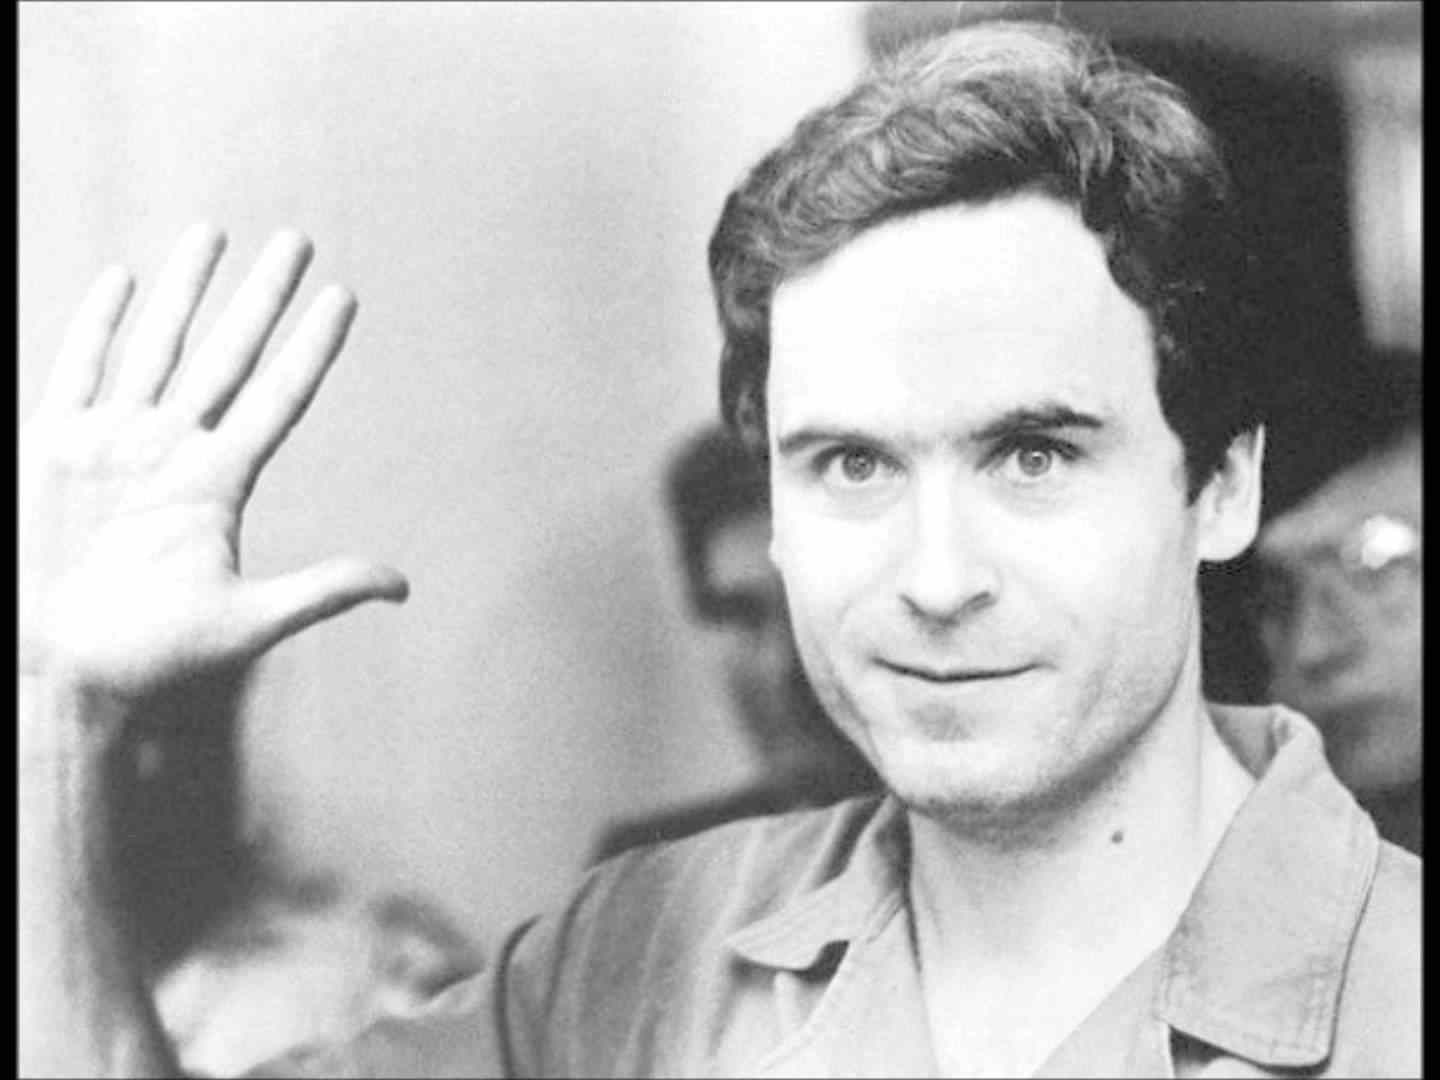 Ted Bundy is one of America's most known serial killers.